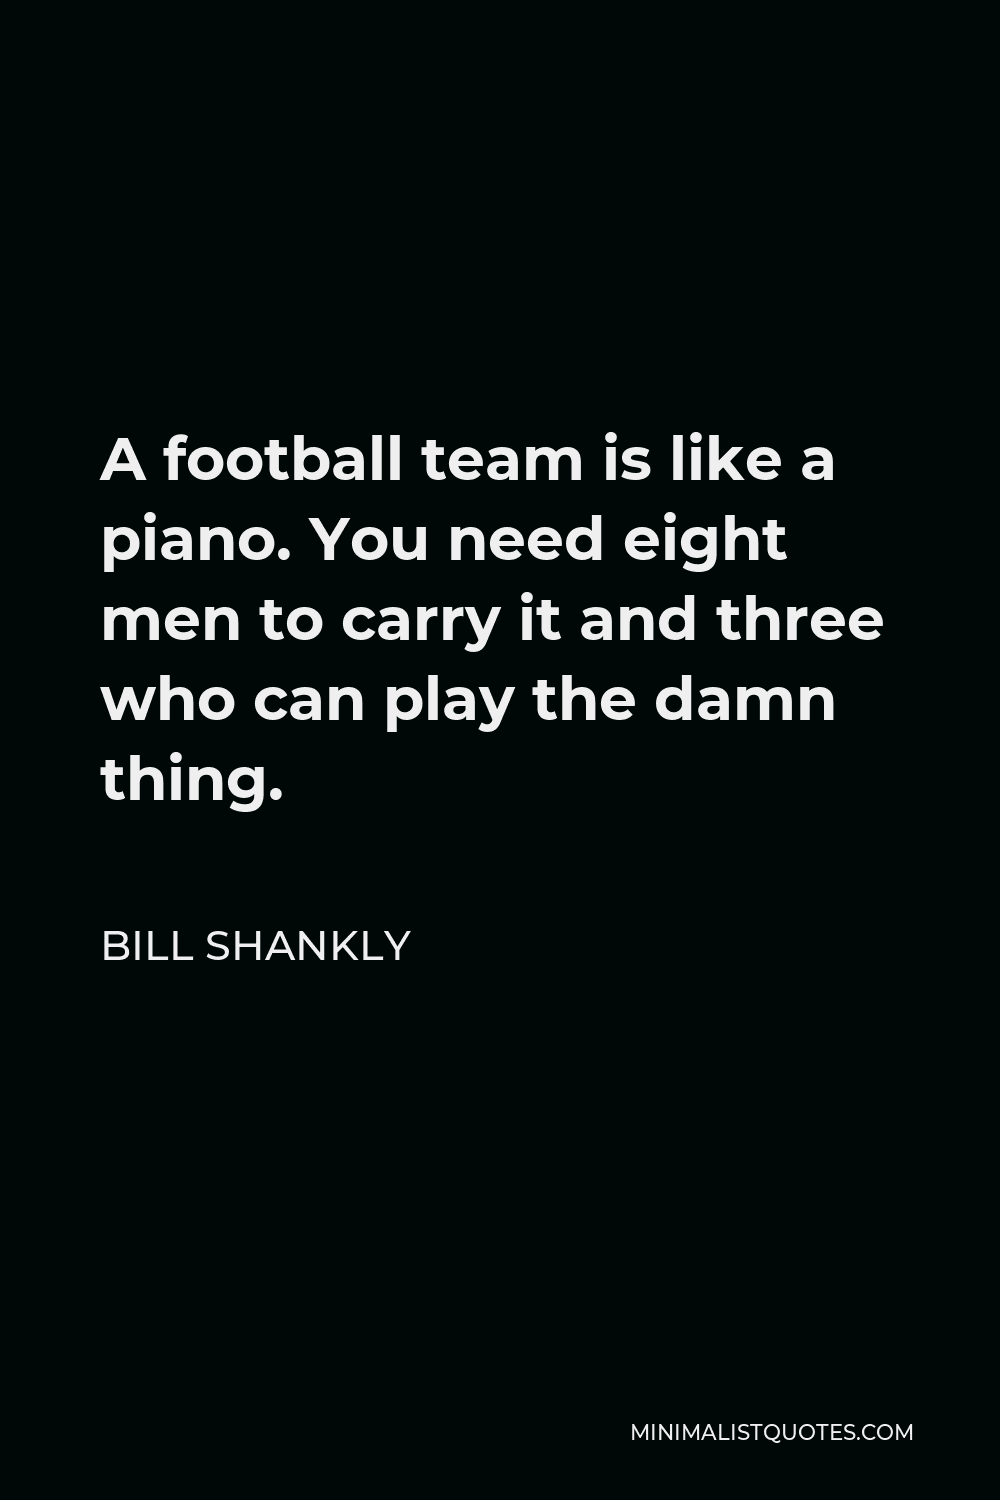 Bill Shankly Quote - A football team is like a piano. You need eight men to carry it and three who can play the damn thing.